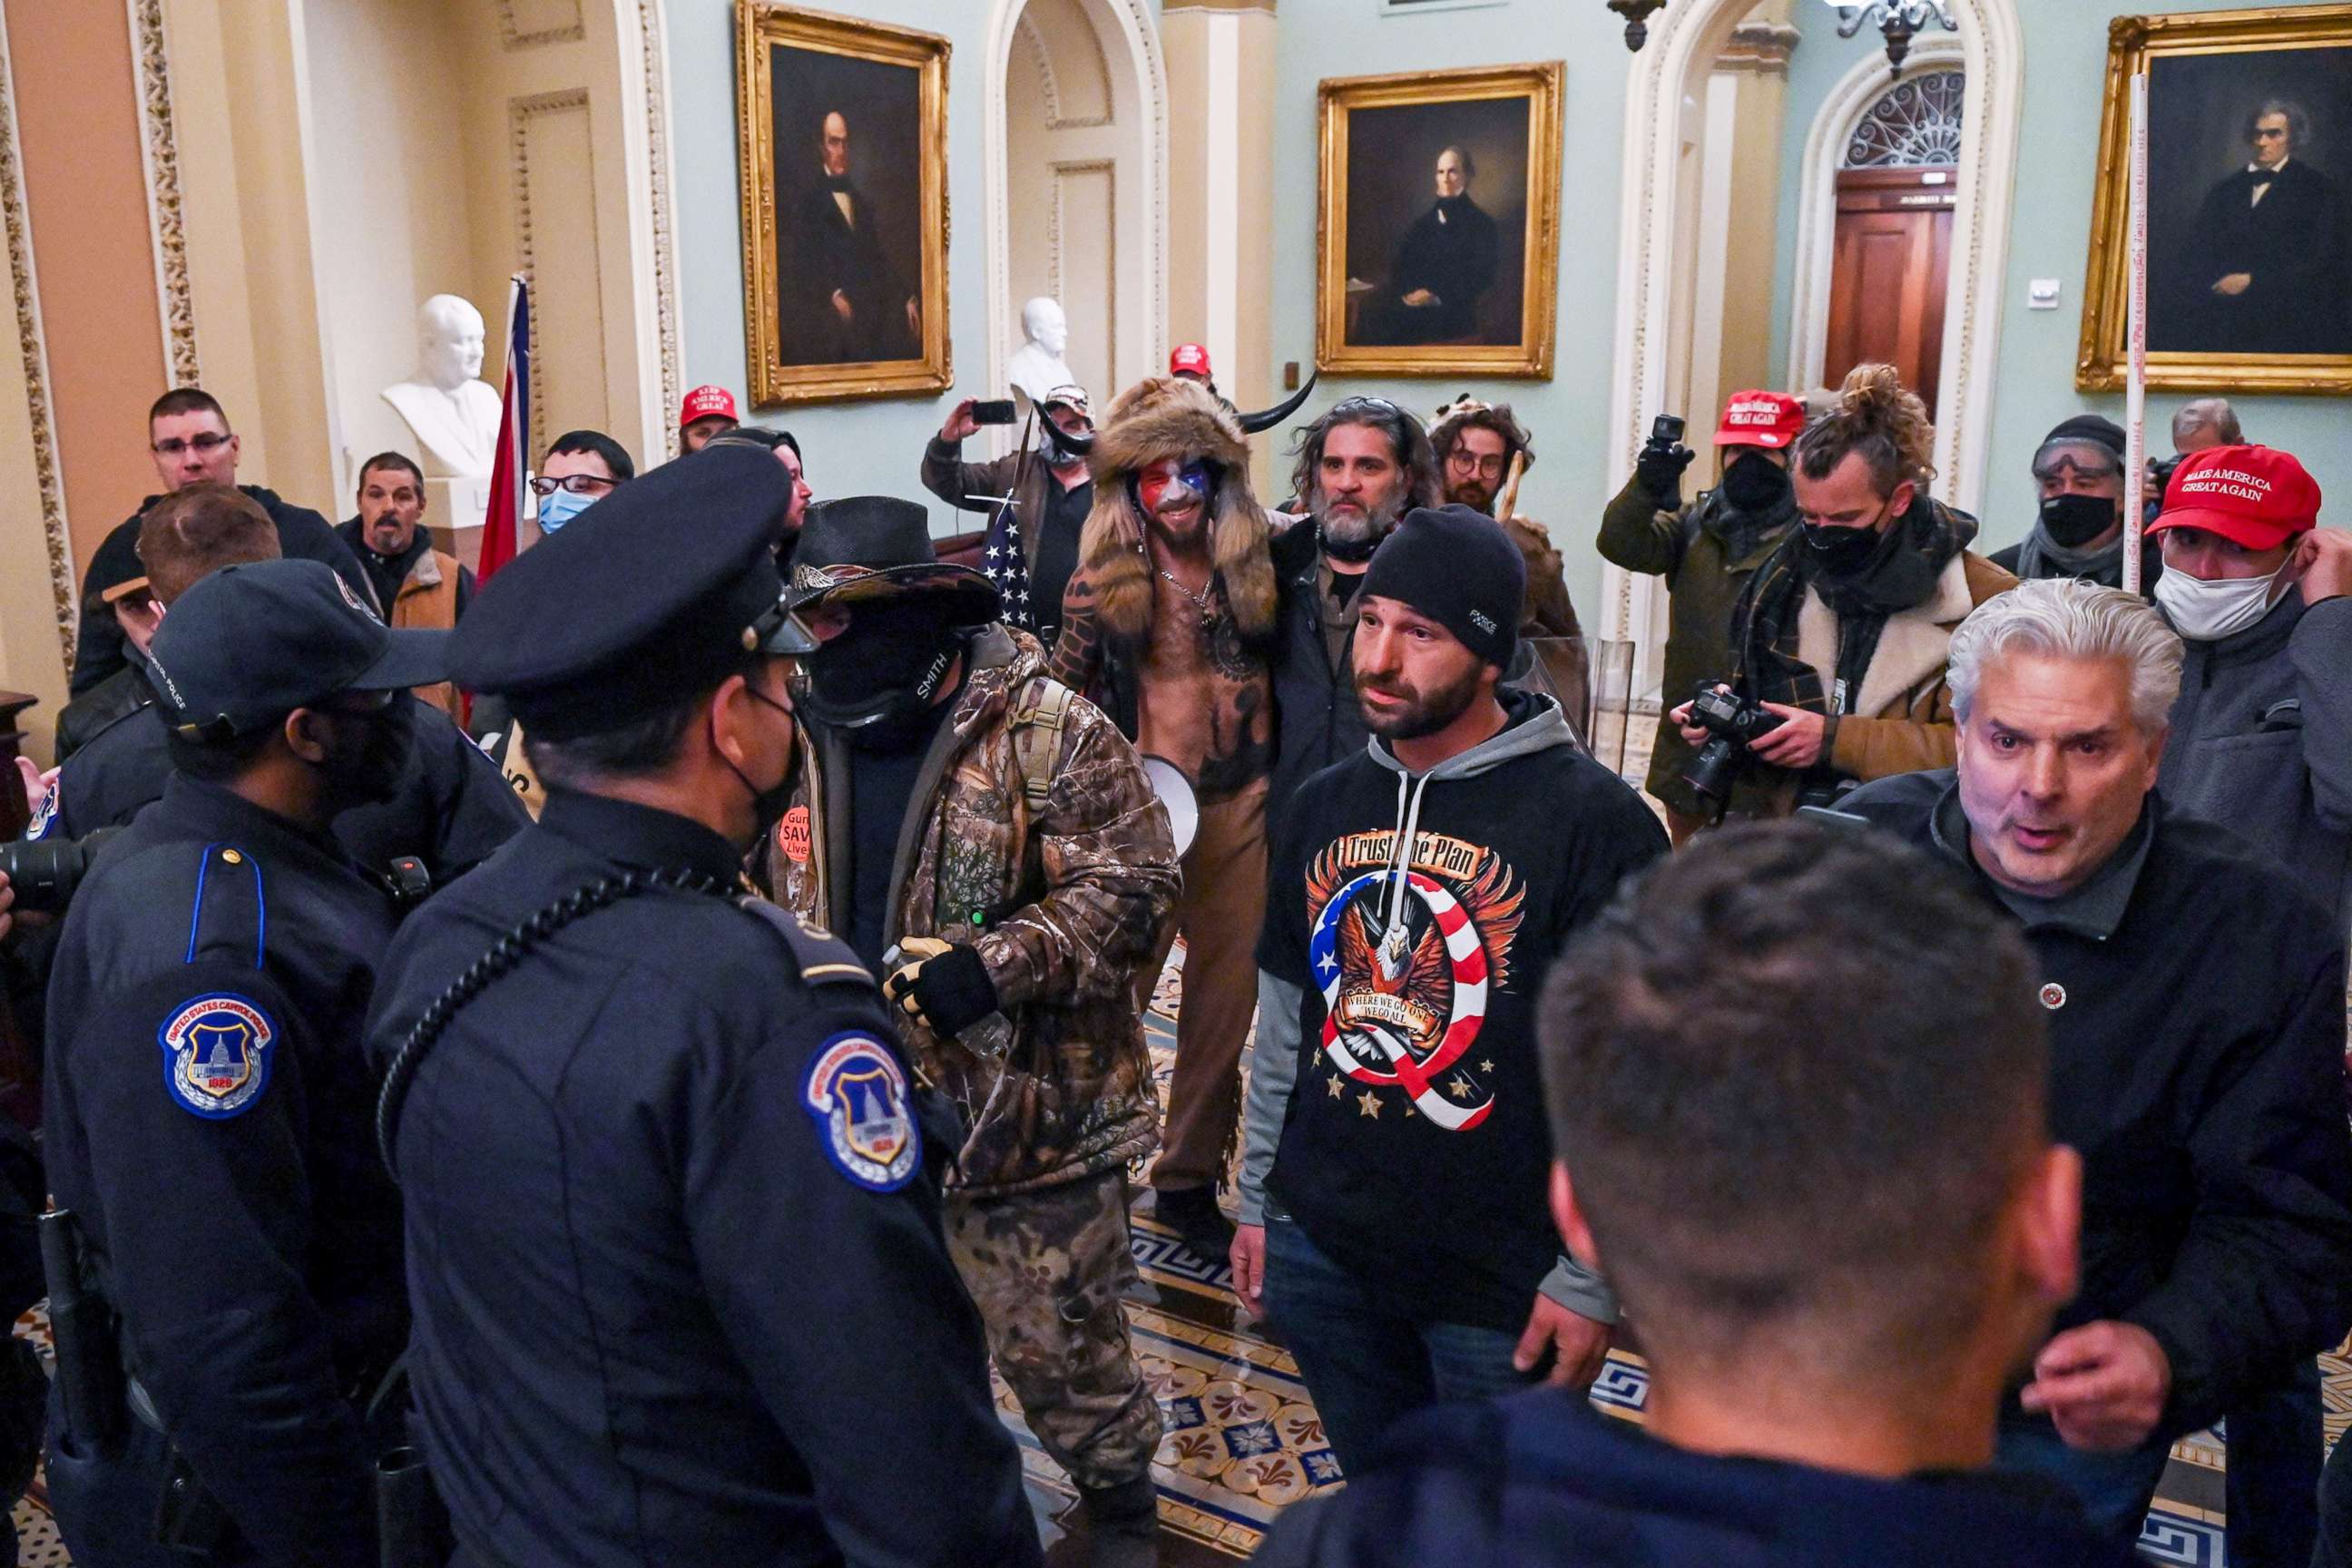 PHOTO: Dominic Pezzola stands among the crowd of supporters of President Donald Trump as they confront Capitol police officers trying to stop them from further entering the Capitol after security was breached in Washington, Jan. 6, 2021.